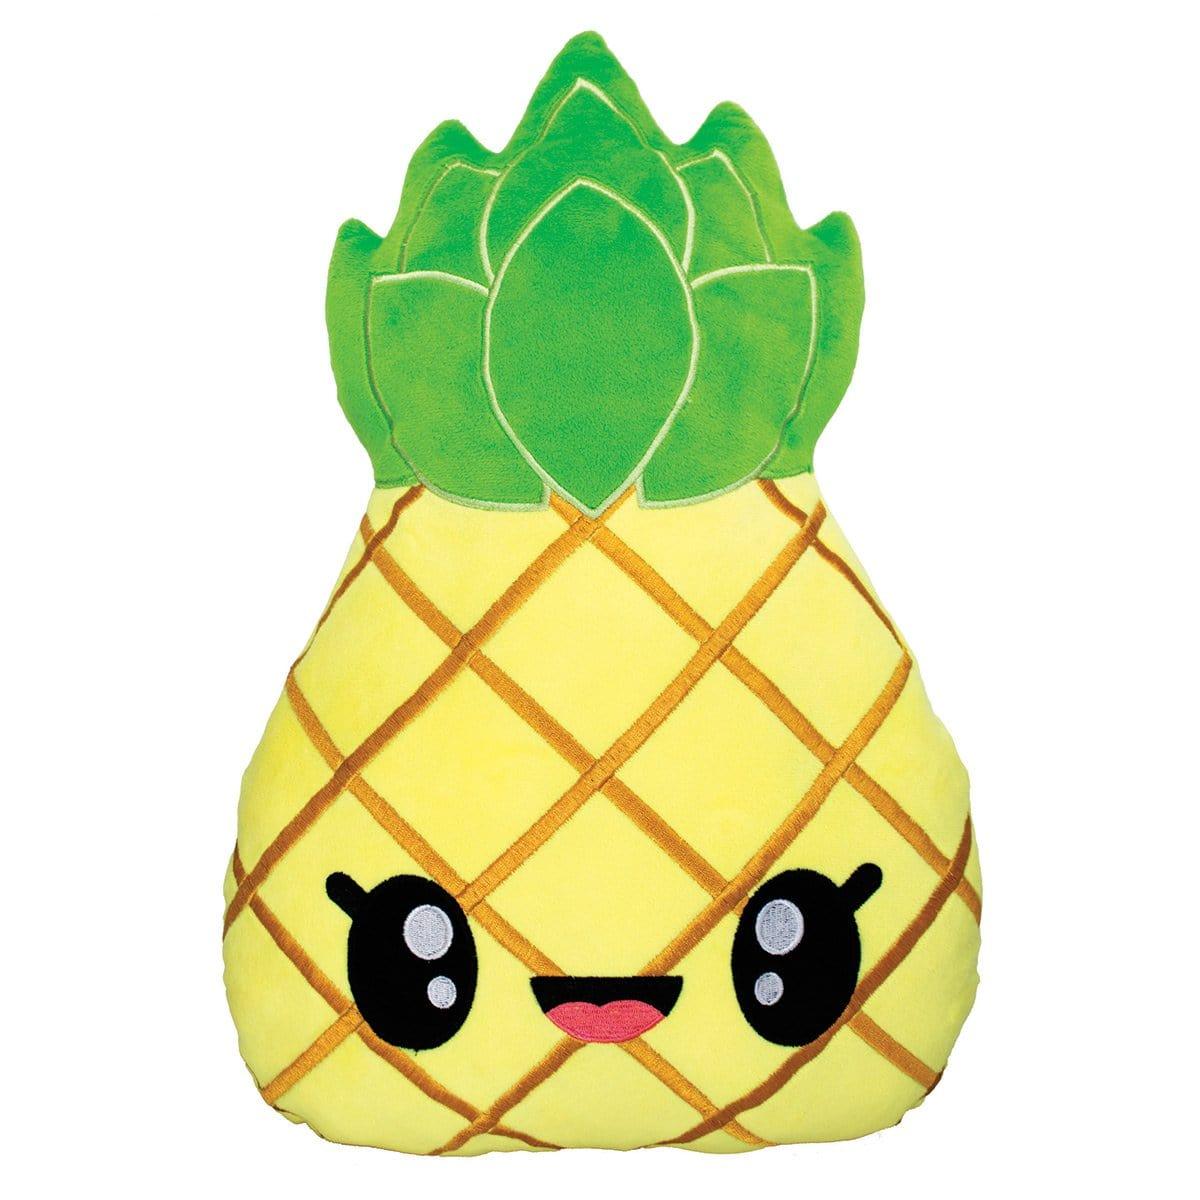 Buy Plushes Smillows - Pineapple sold at Party Expert